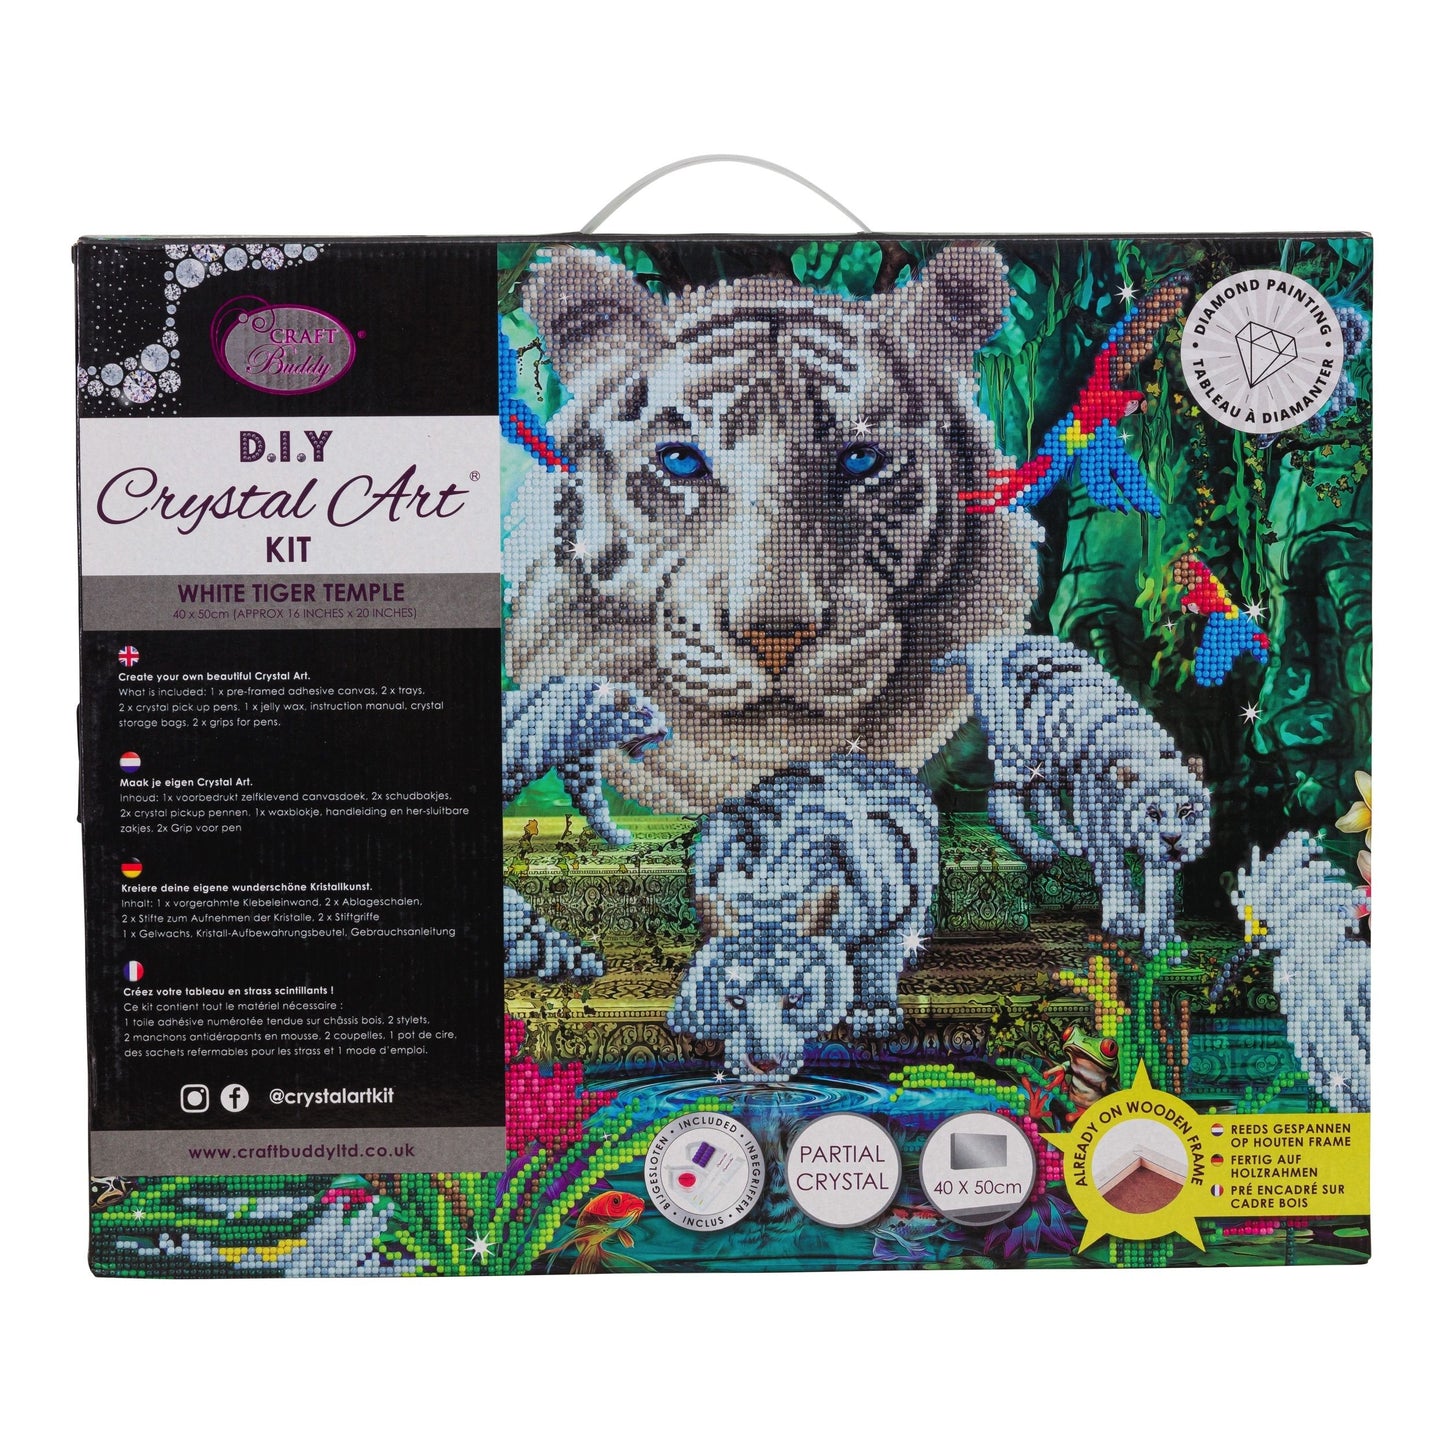 Craft Buddy Partial Crystal Mounted Crystal Art Kit 40cm x 50cm - White Tiger Temple